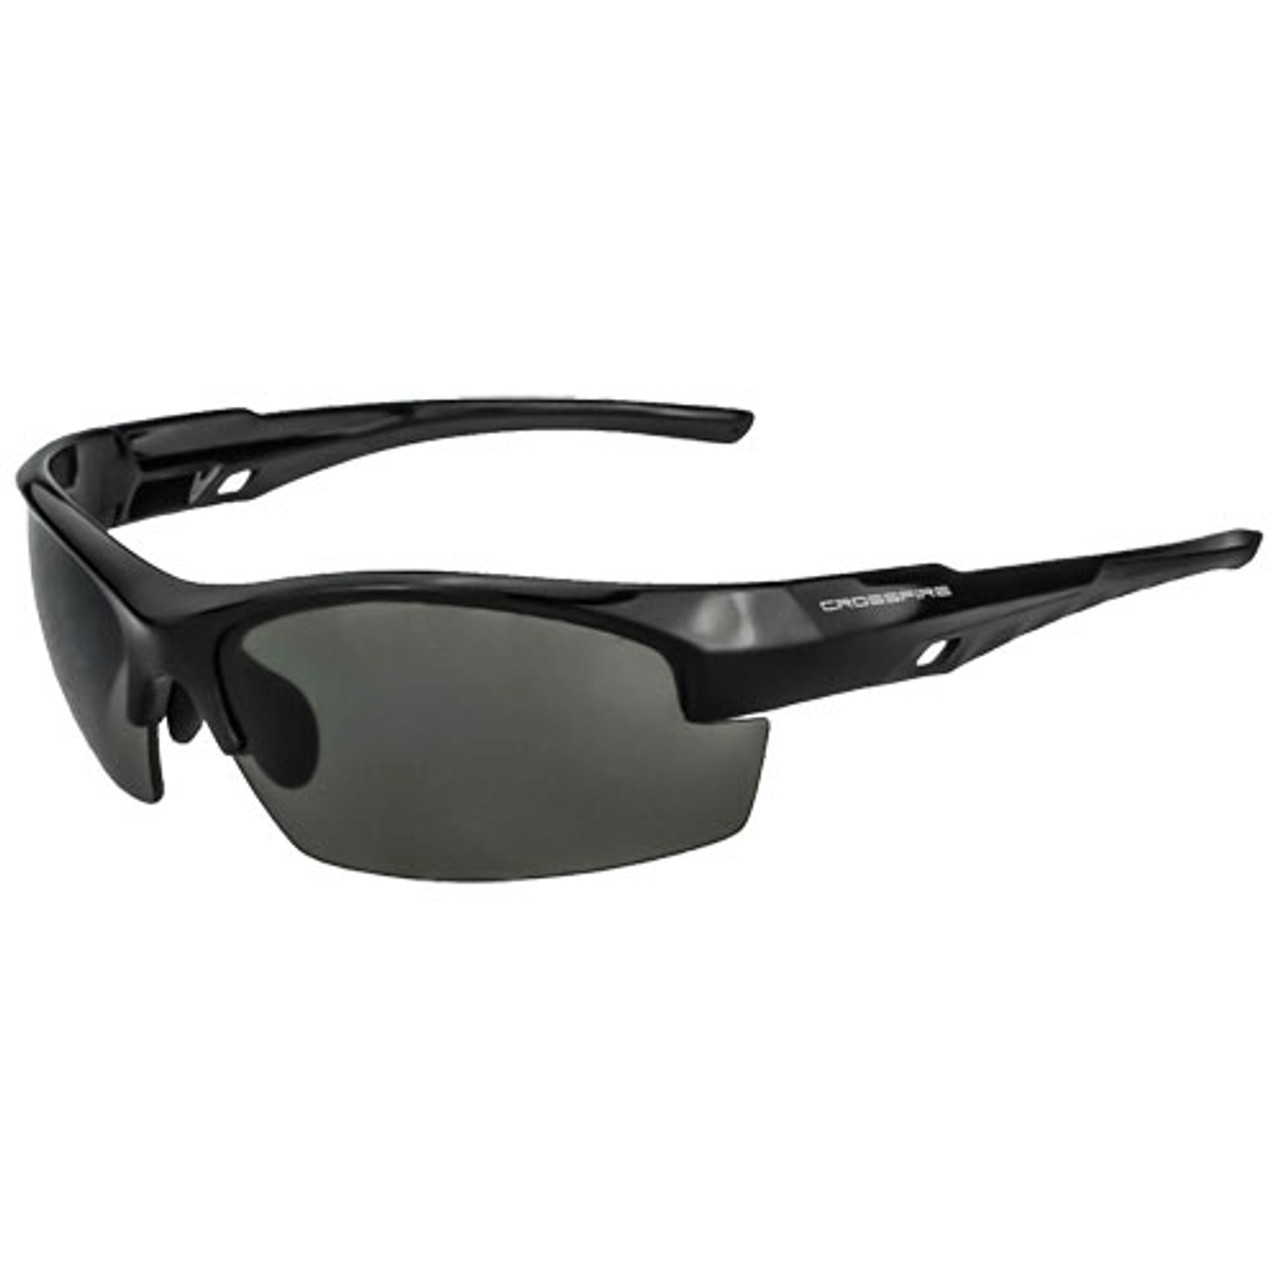 Crossfire Crucible 4061 Safety Glasses